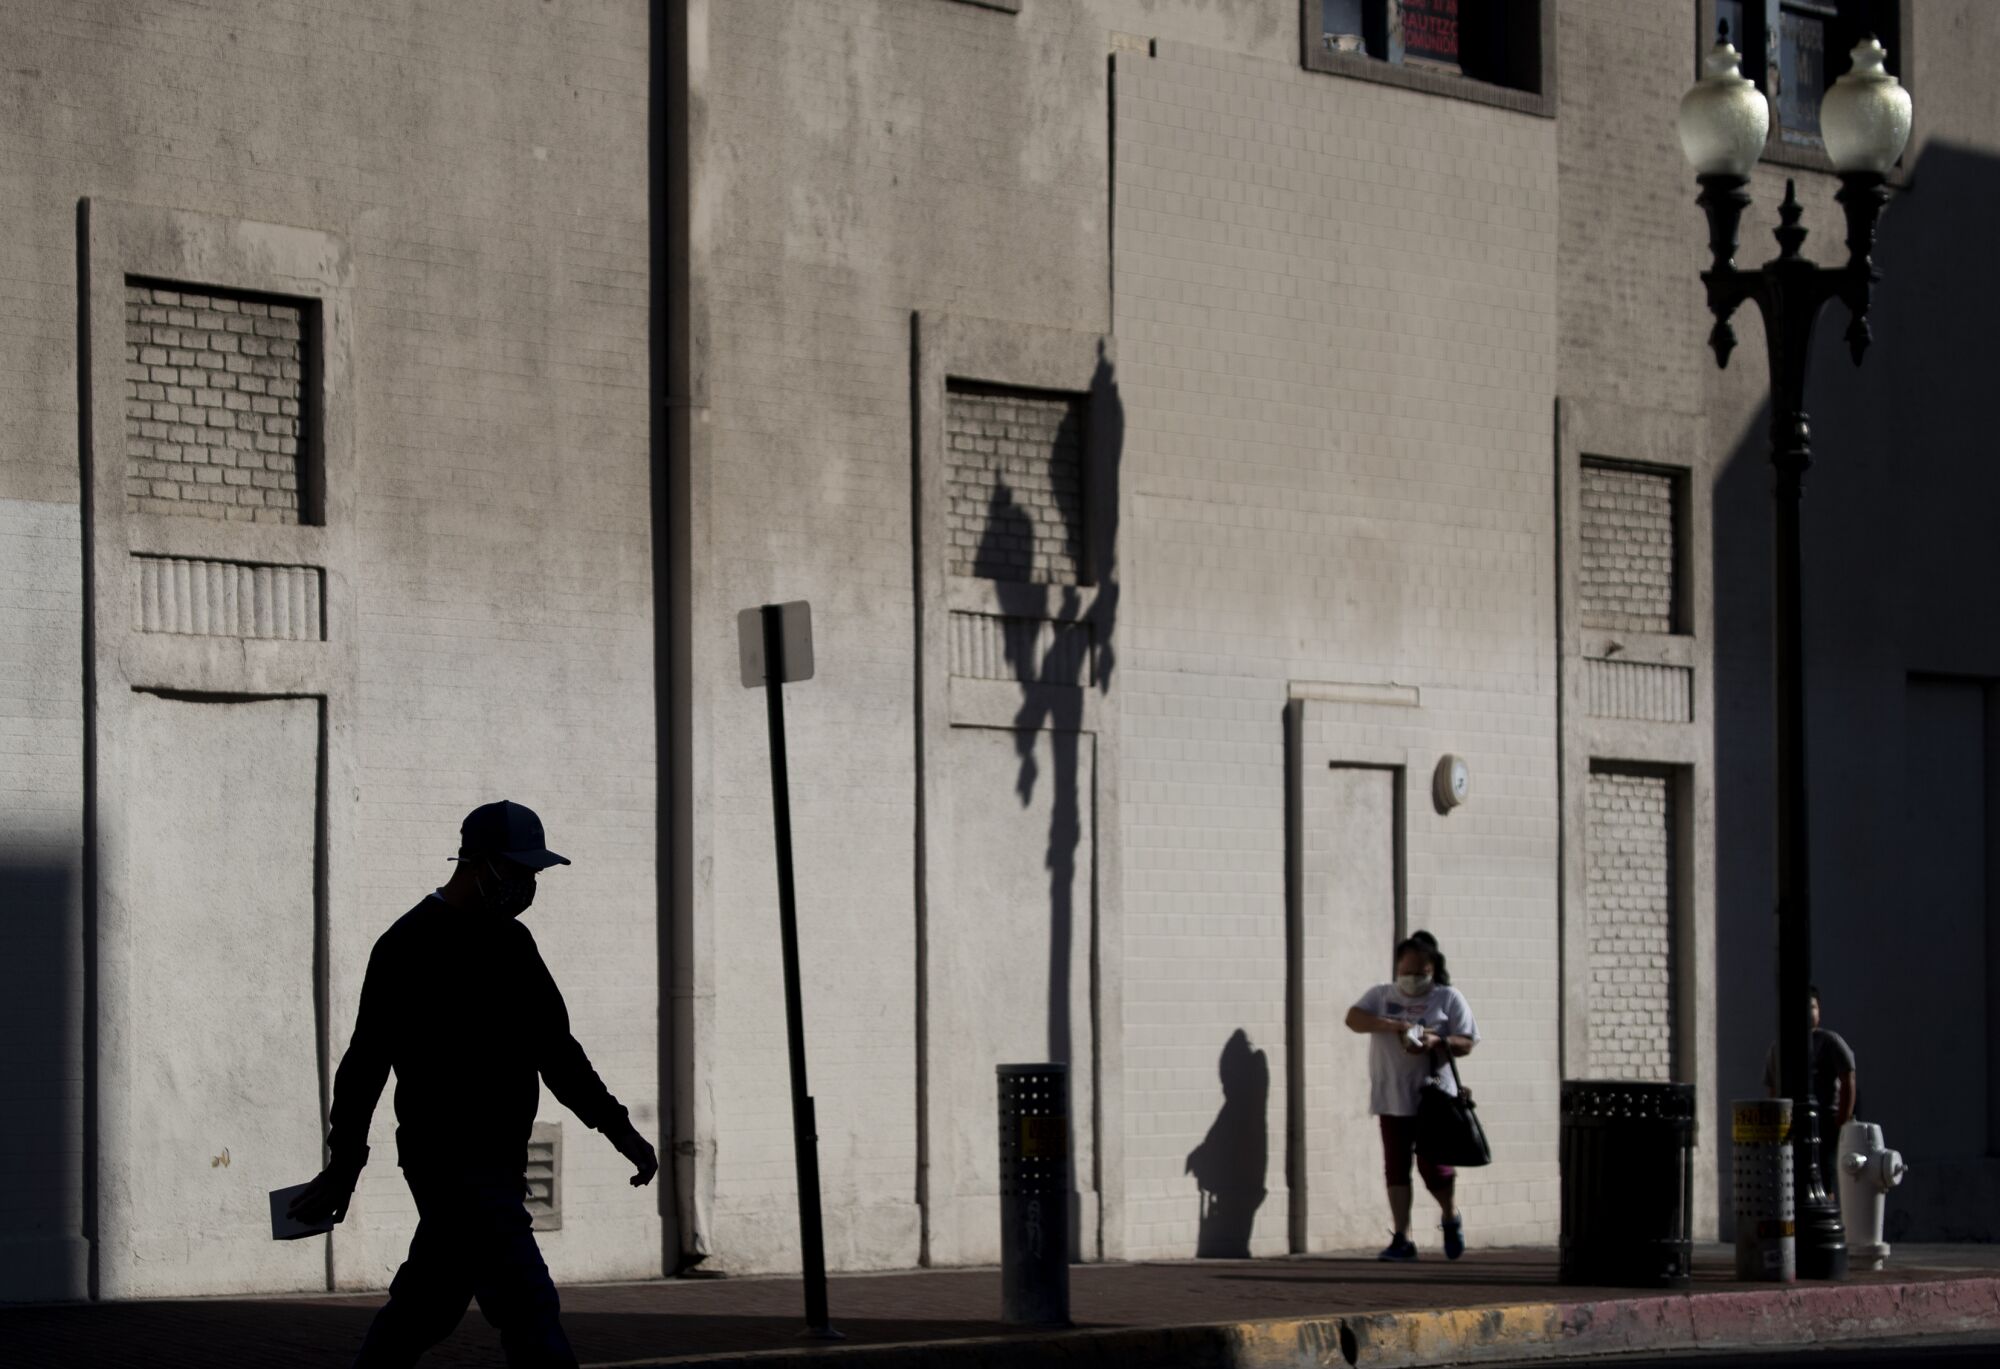 Shadows cast against a gray wall by pedestrians and street signs